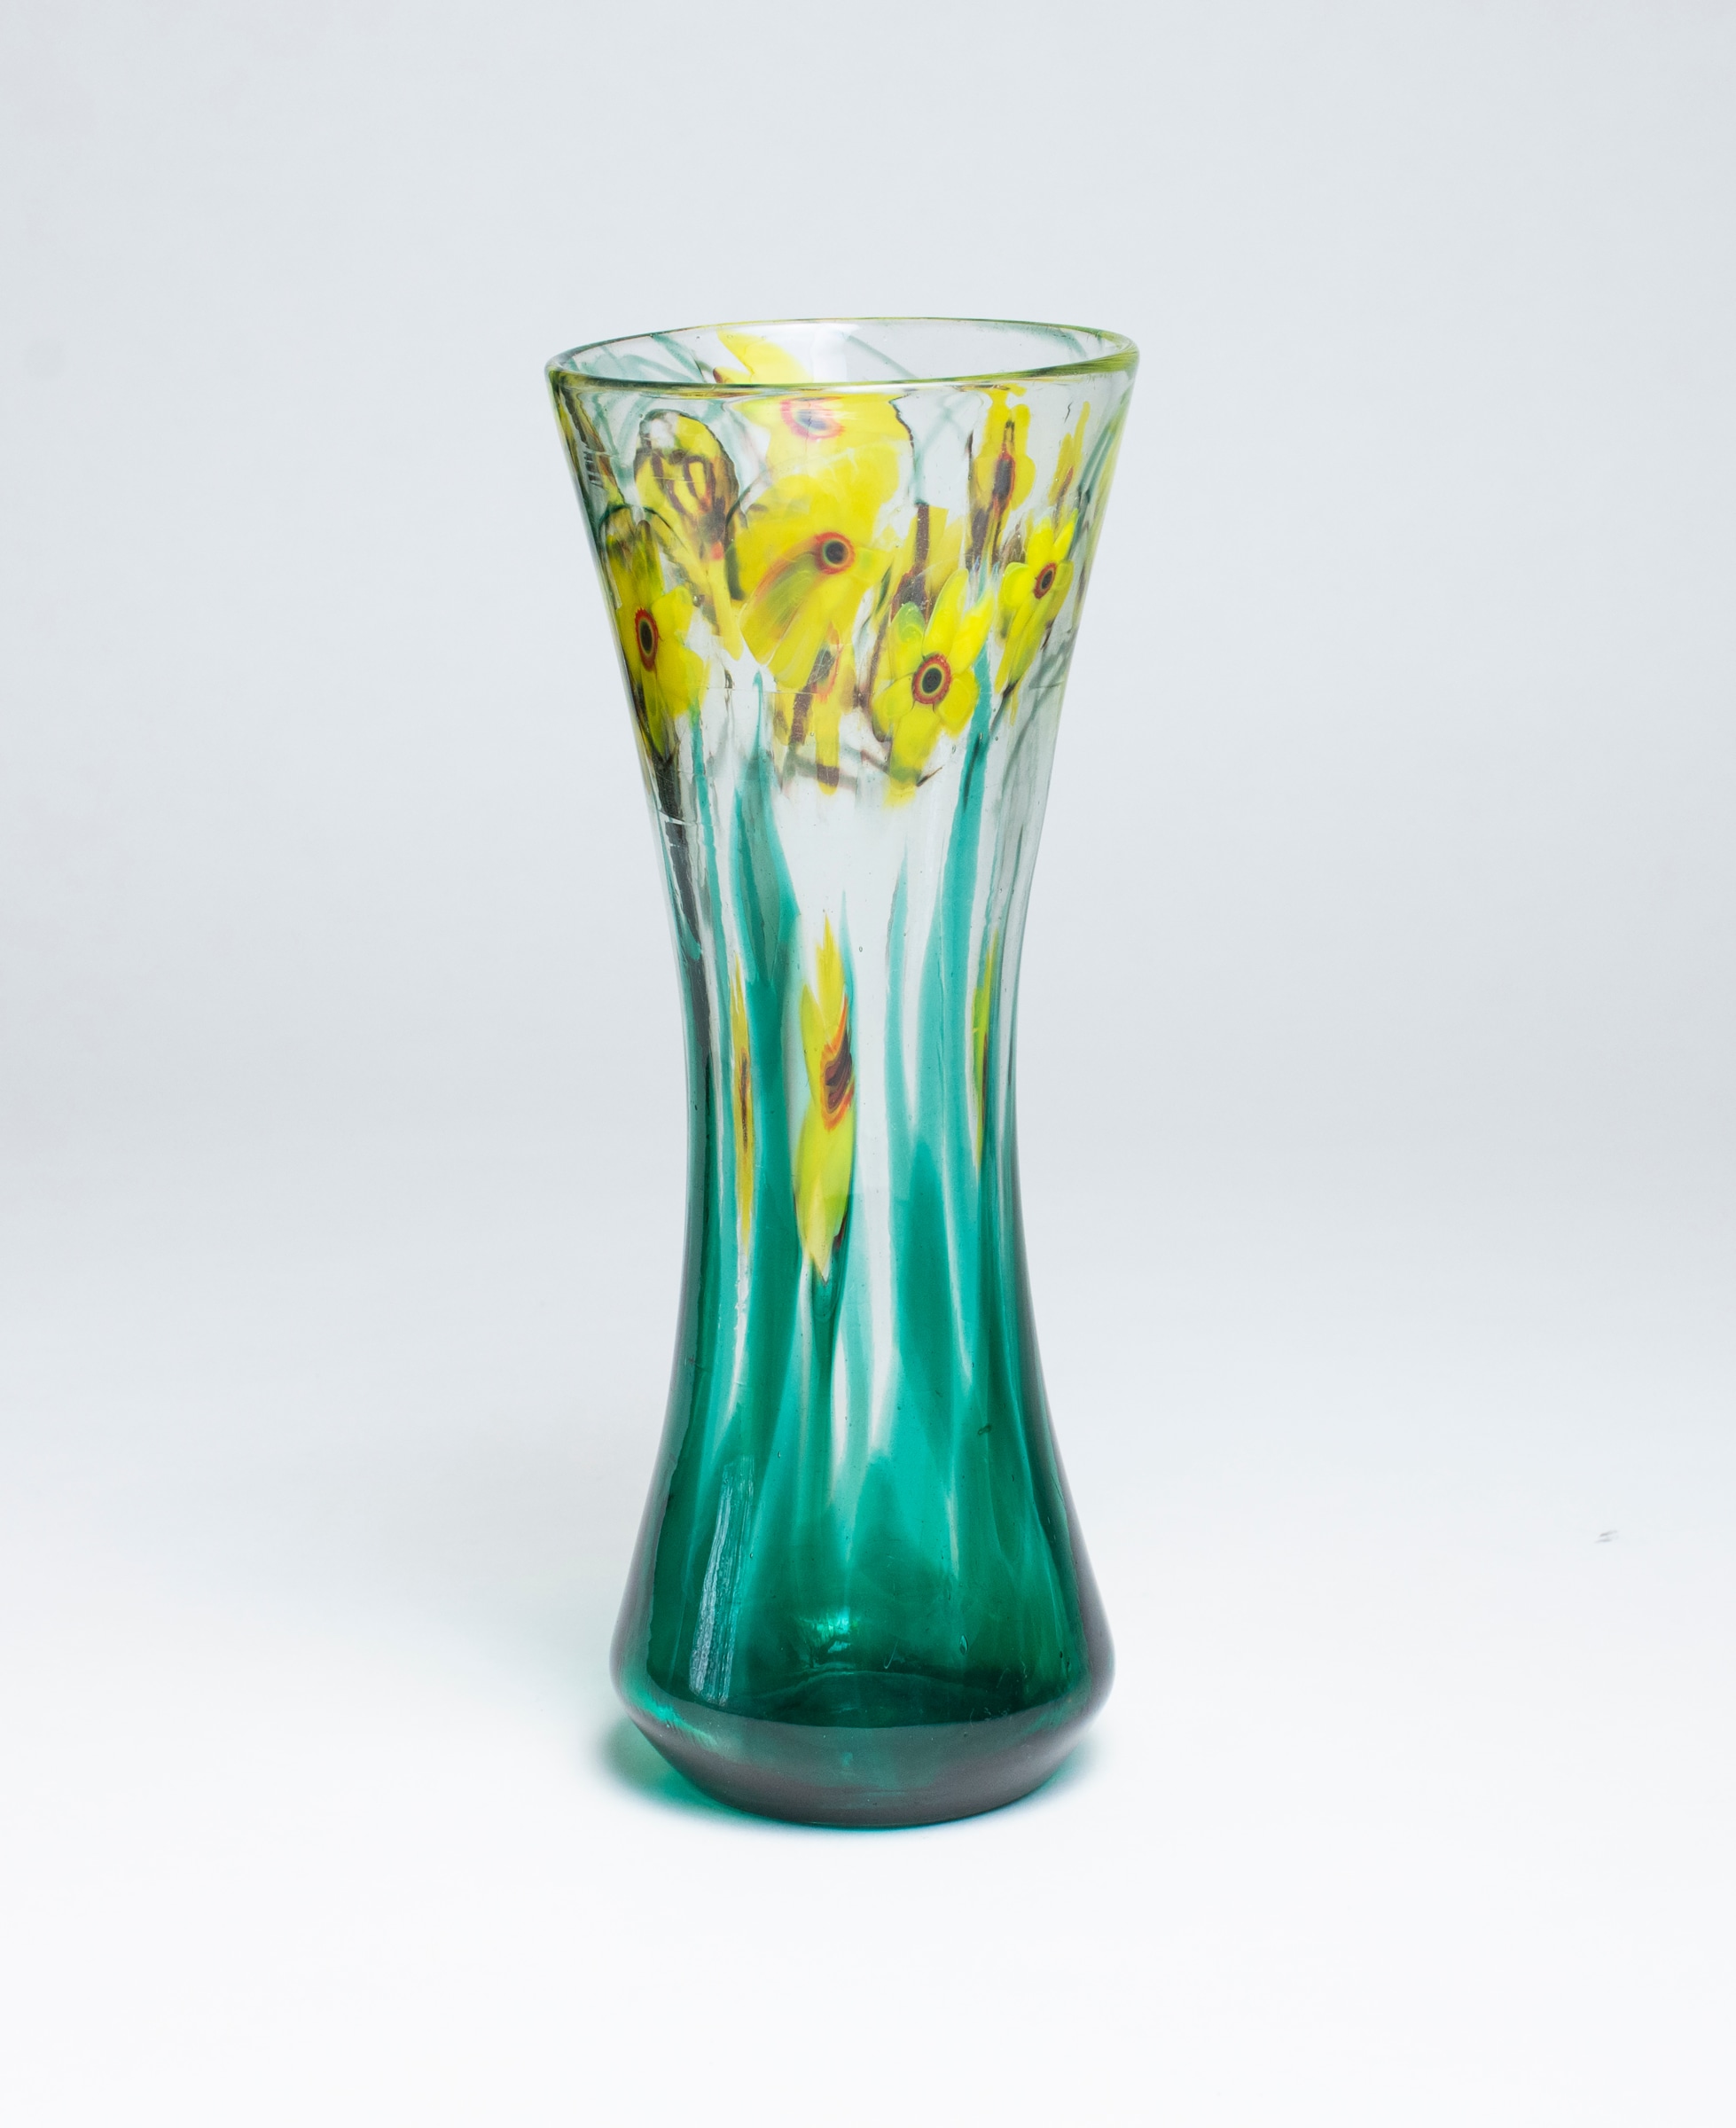 A tiffany favrile glass paperweight vase, cylindrical form with slightly cinched waist and flared rim, the clear glass with motif of bright yellow flowers with five petals and red centers, rising from transparent green stems.